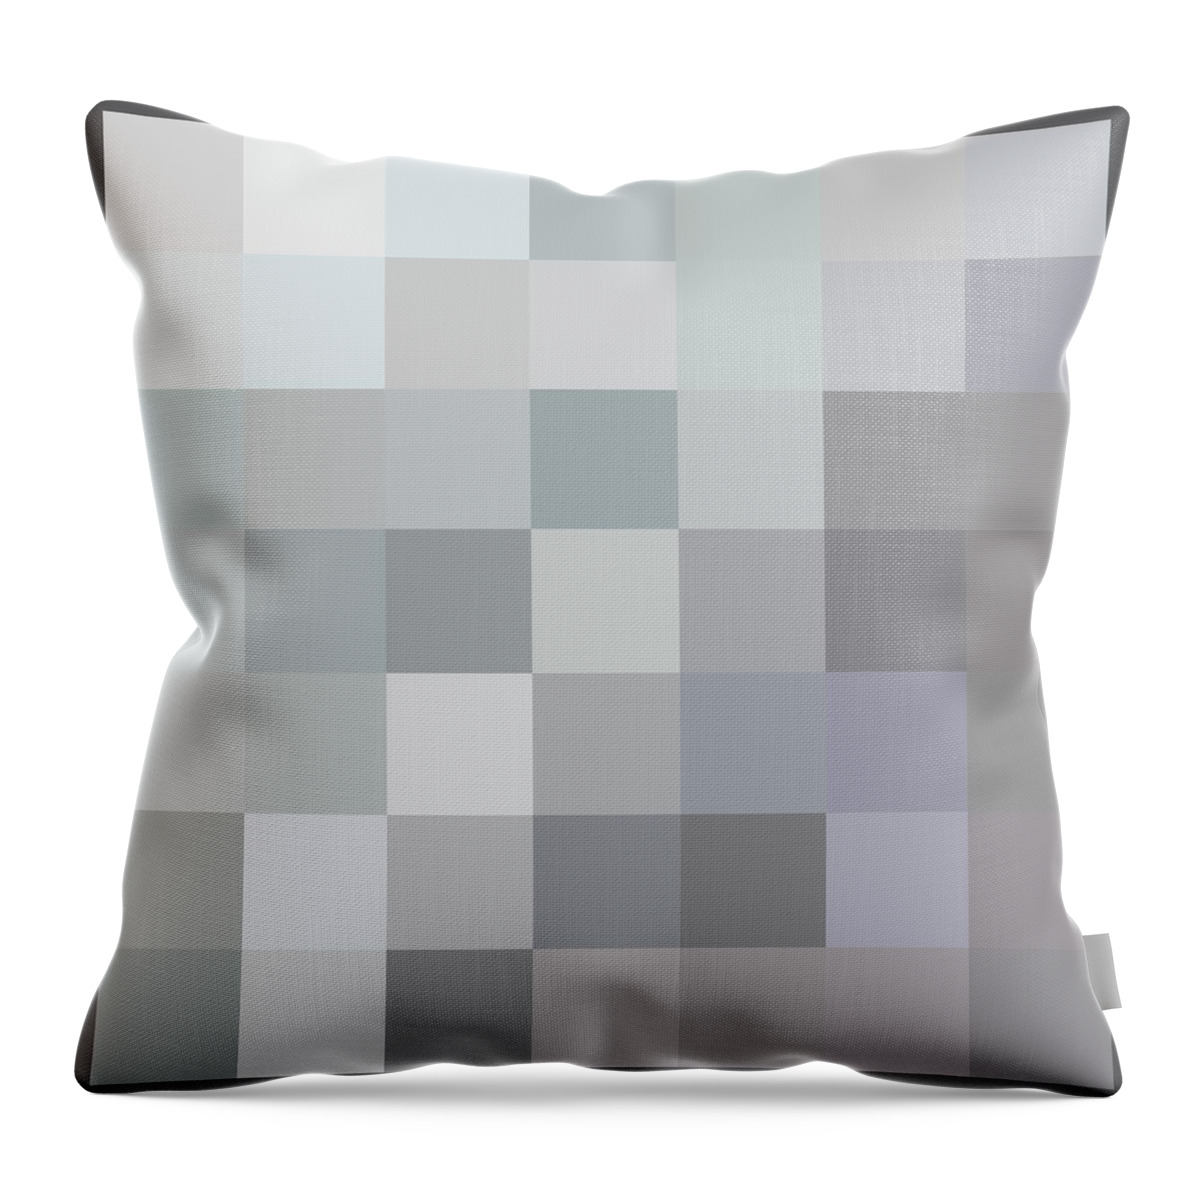 Richard Reeve Throw Pillow featuring the digital art 50 Shades of Grey by Richard Reeve